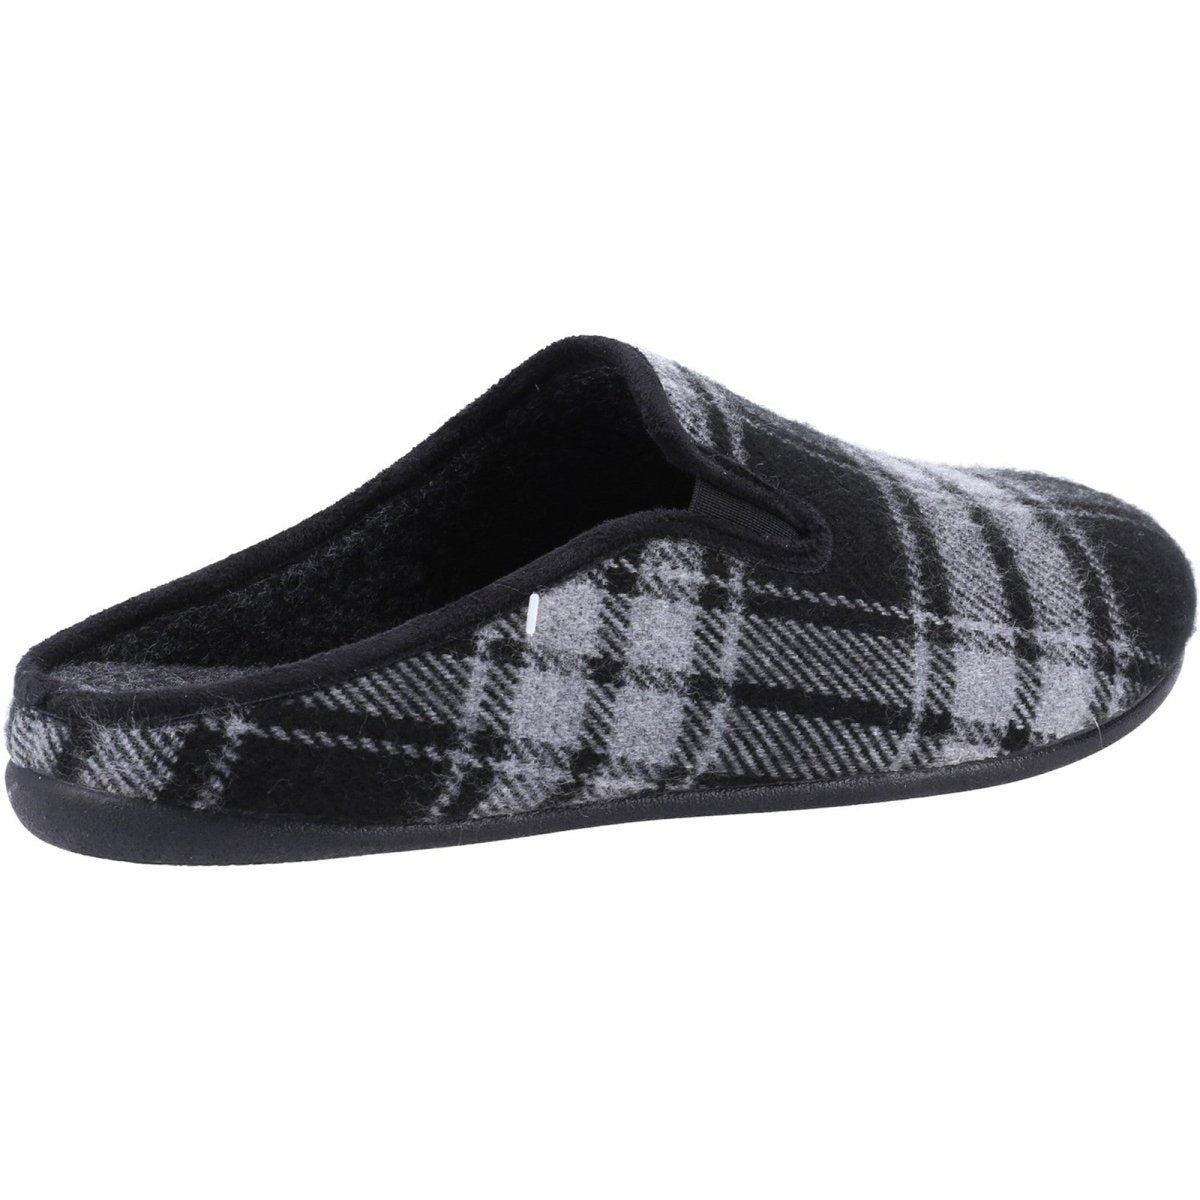 Cotswold Syde Chequered Slip-On Mens Mule Slippers - Shoe Store Direct